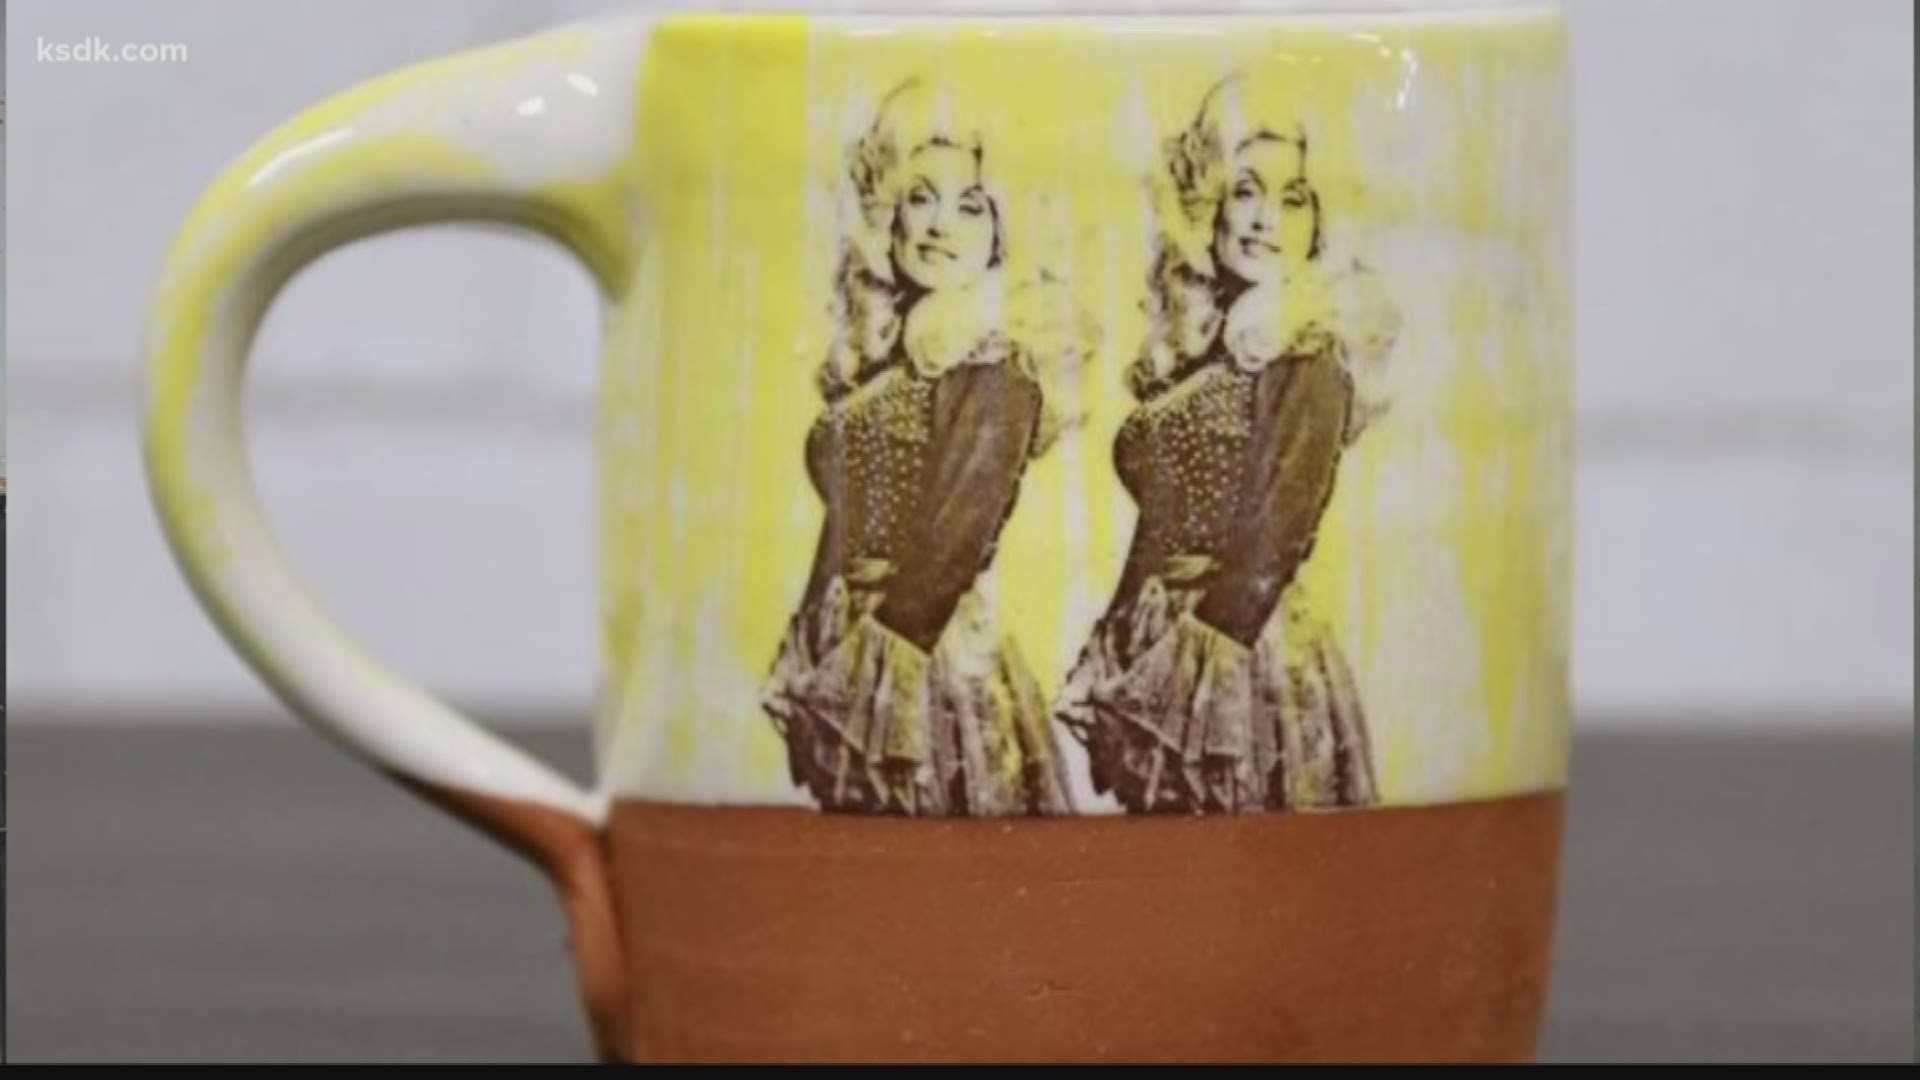 'Clay by Tay' is known for pop culture-inspired mugs.